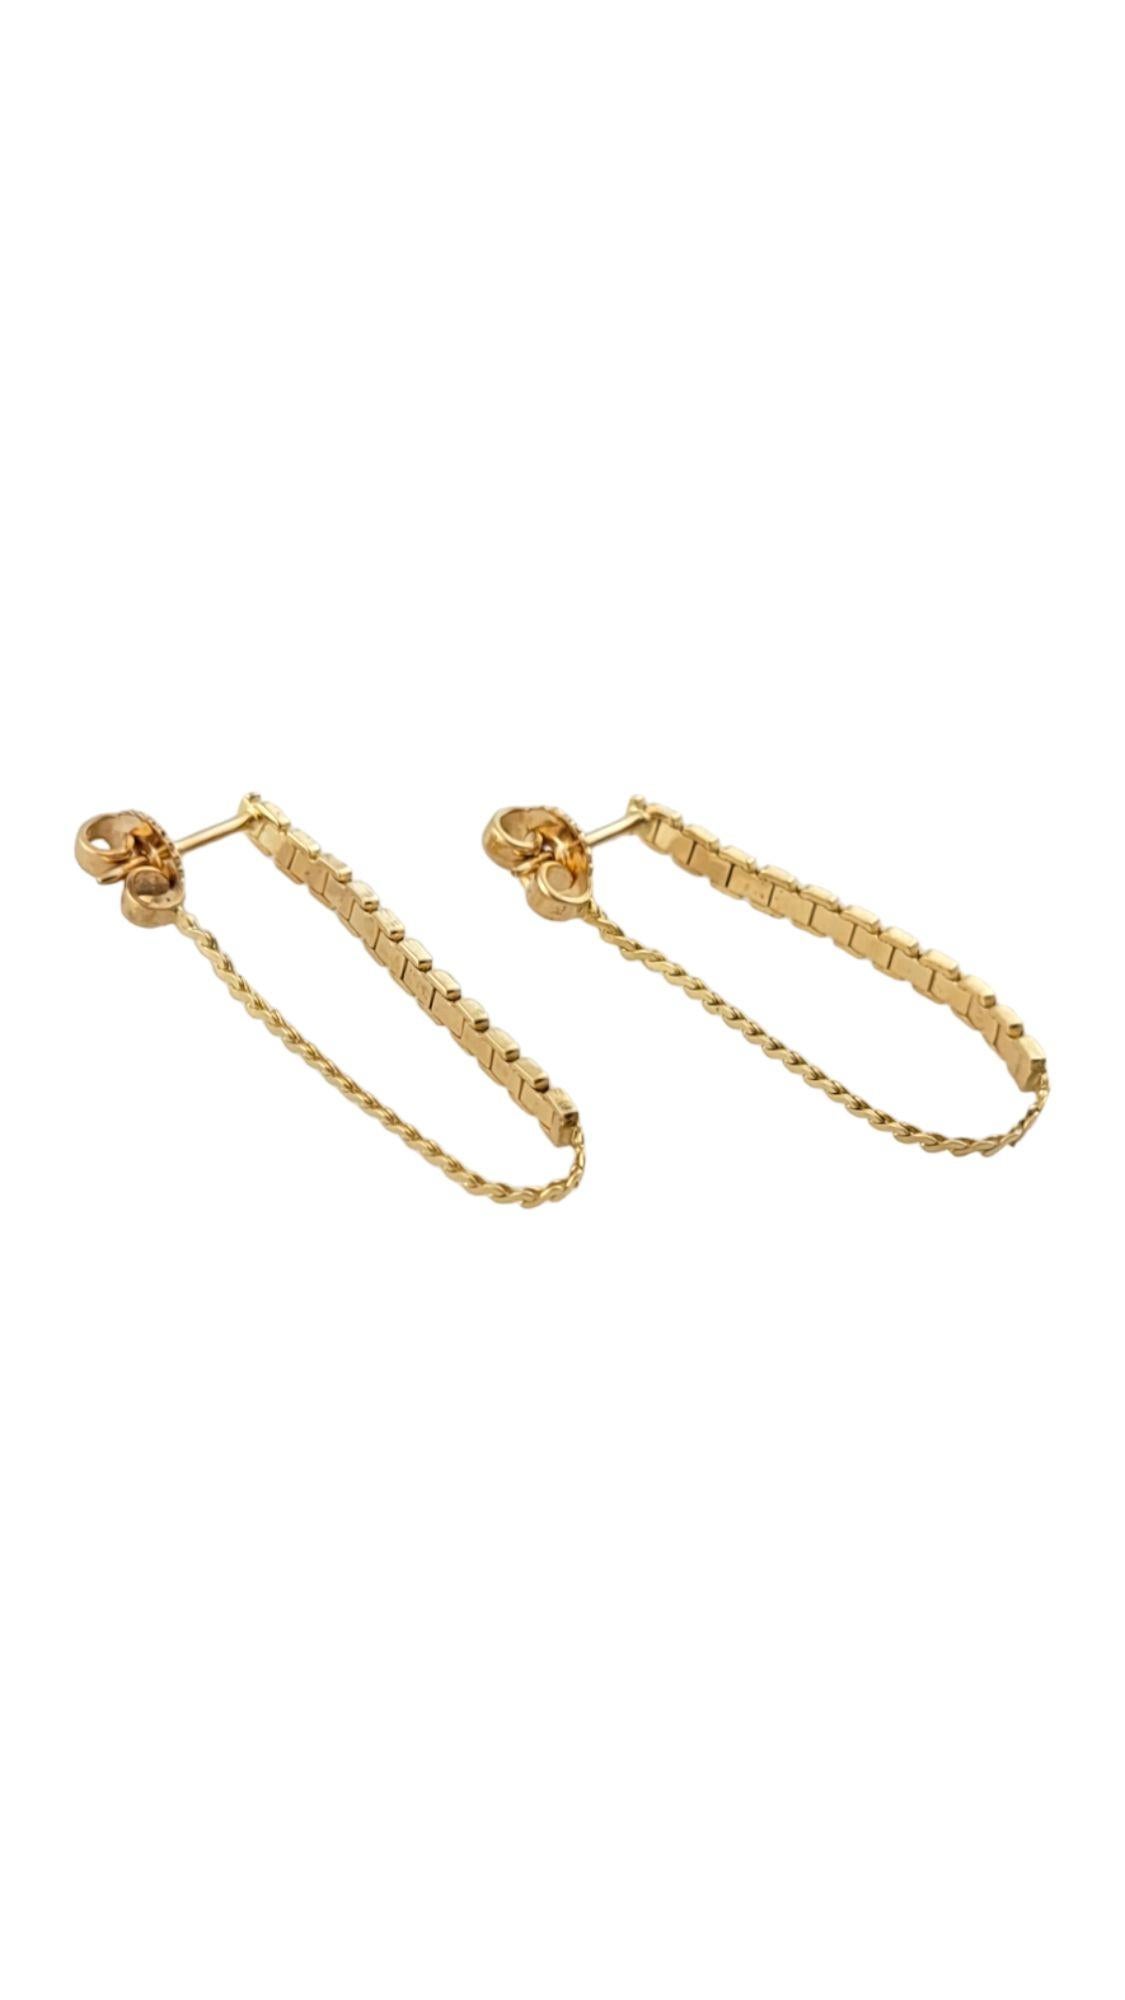 10K Yellow Gold Chain Dangle Earrings #14315 In Good Condition For Sale In Washington Depot, CT